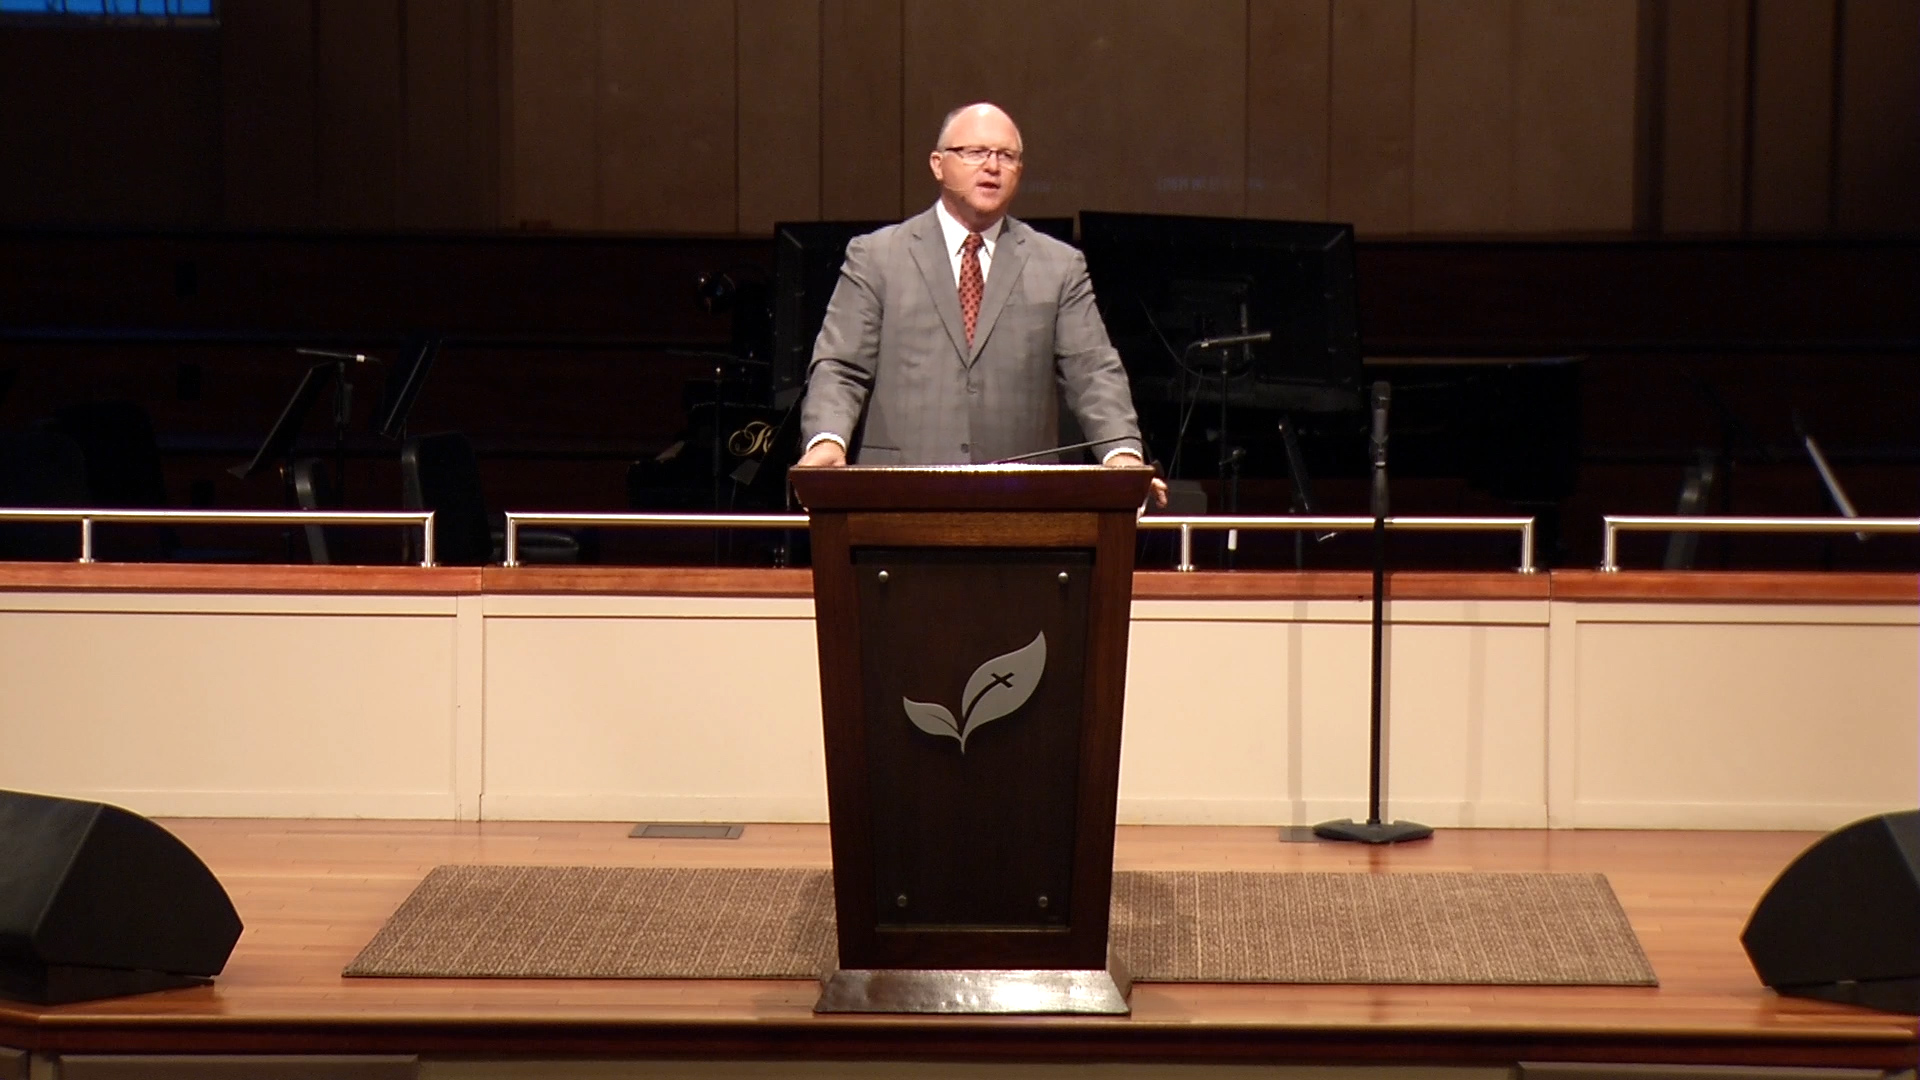 Pastor Paul Chappell: Delivered by the Grace of God